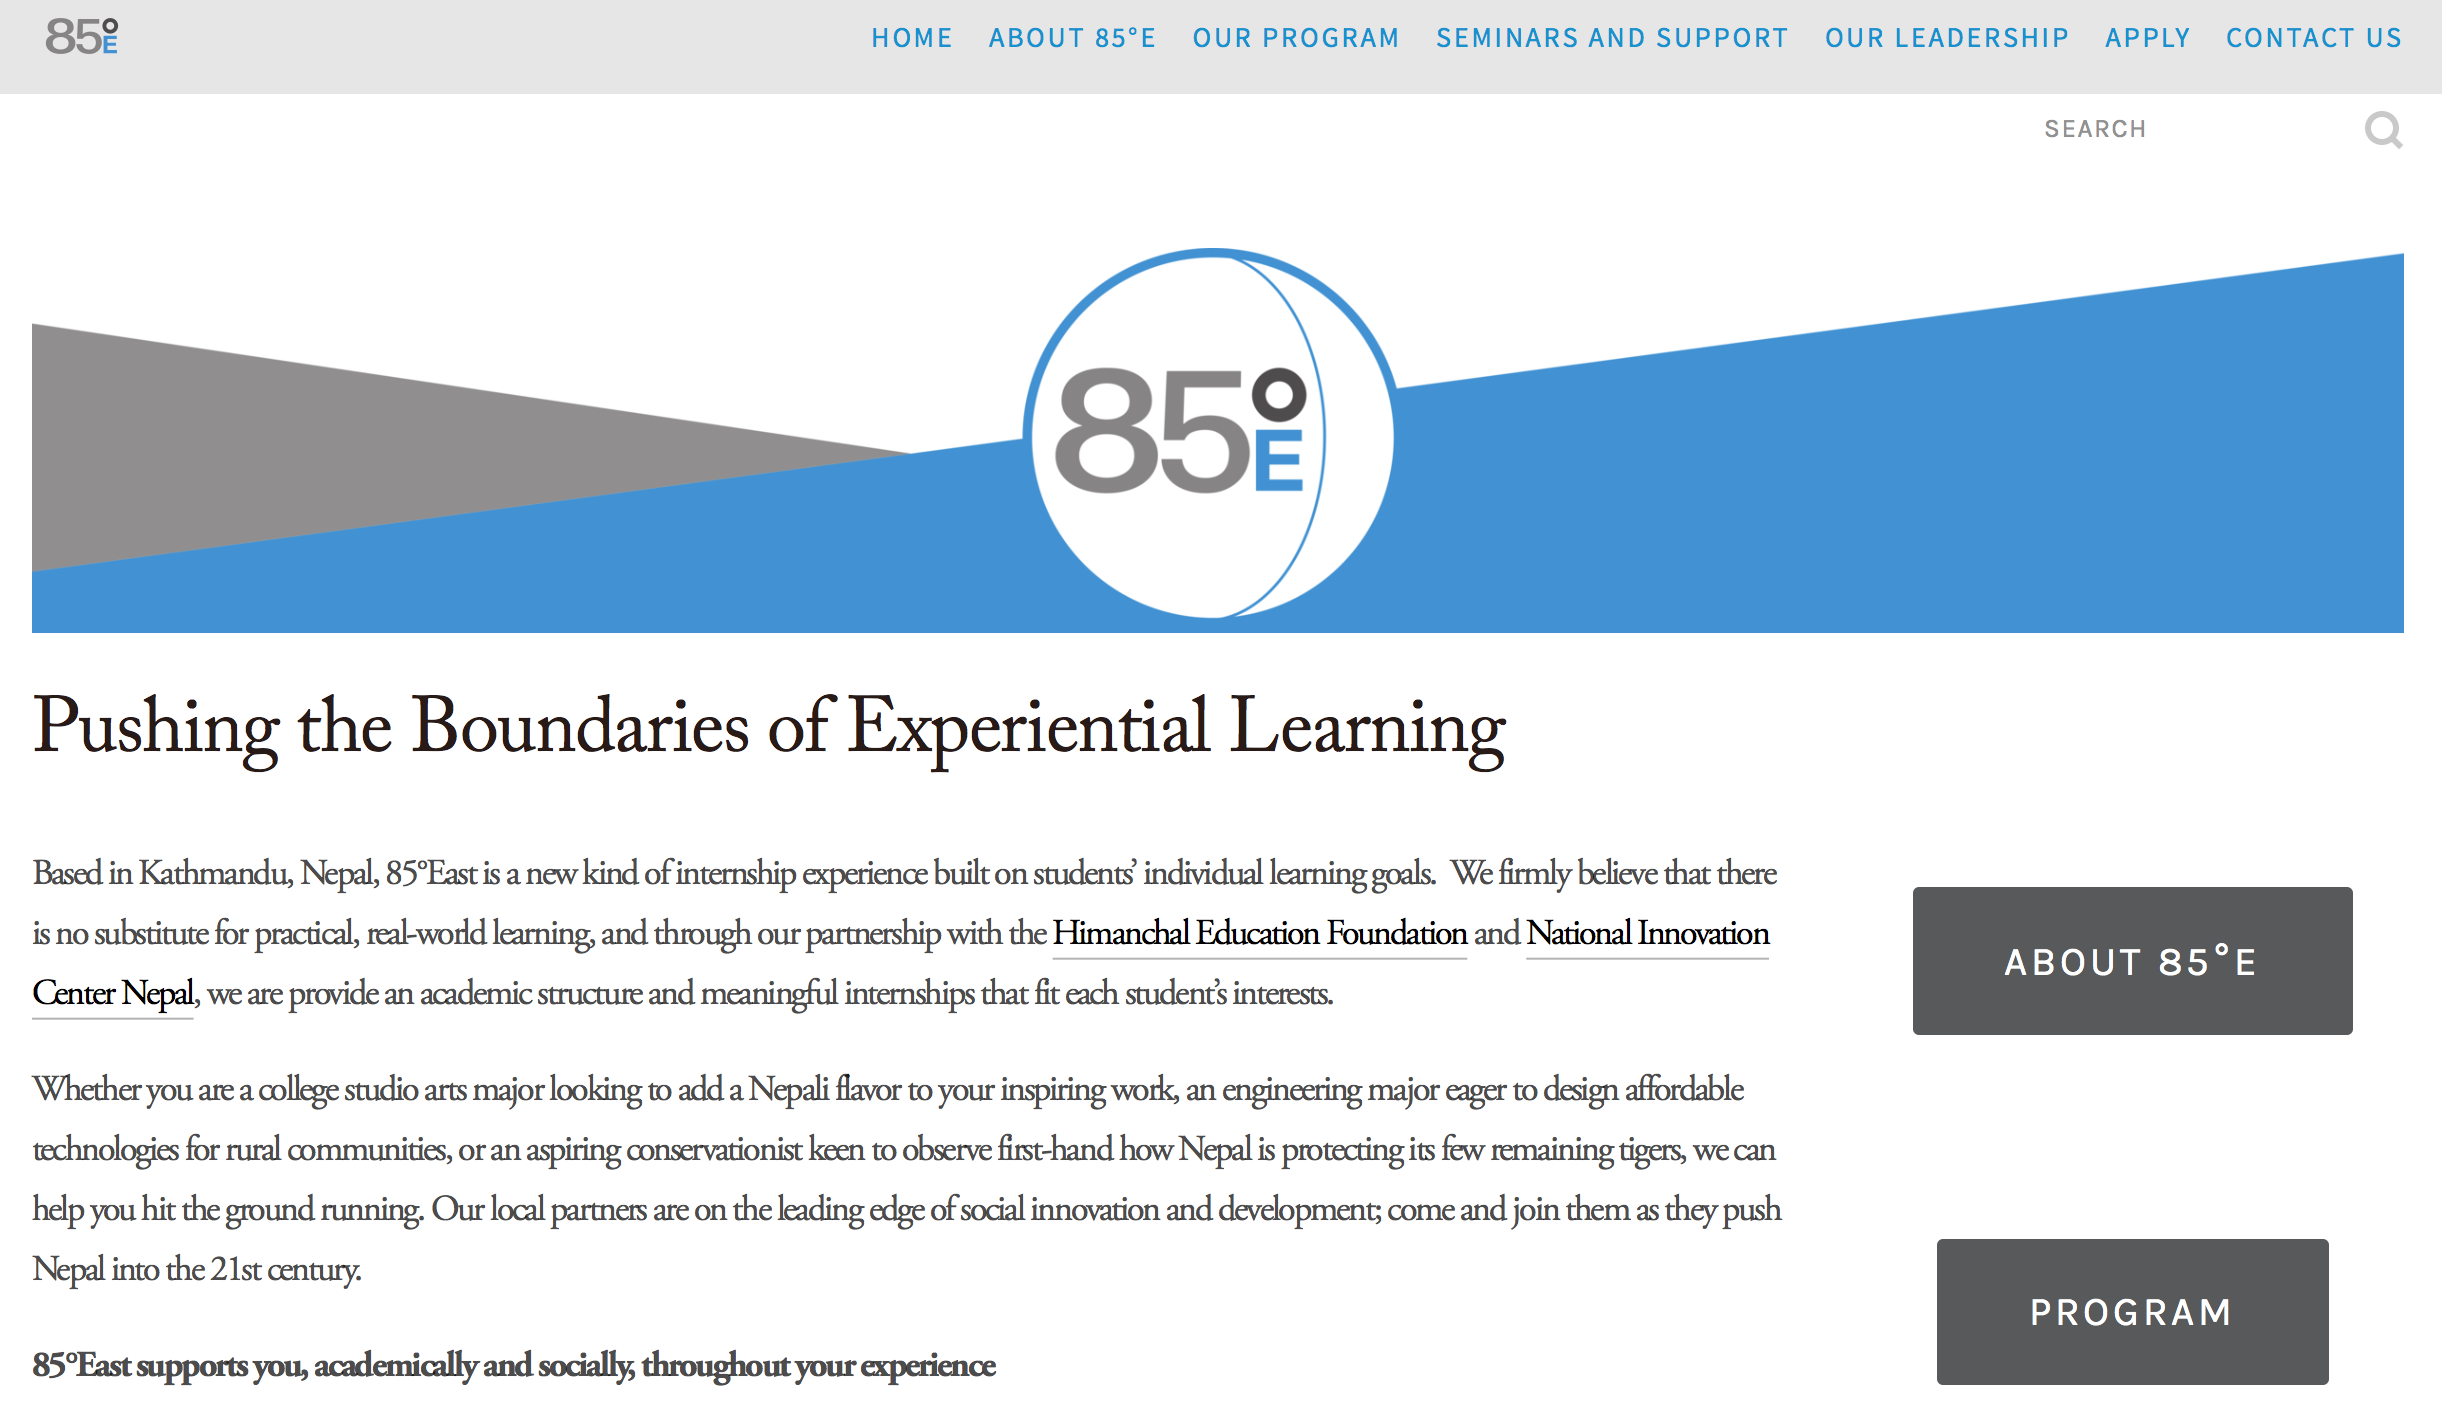 85° EAST – A New Kind of Internship Experience